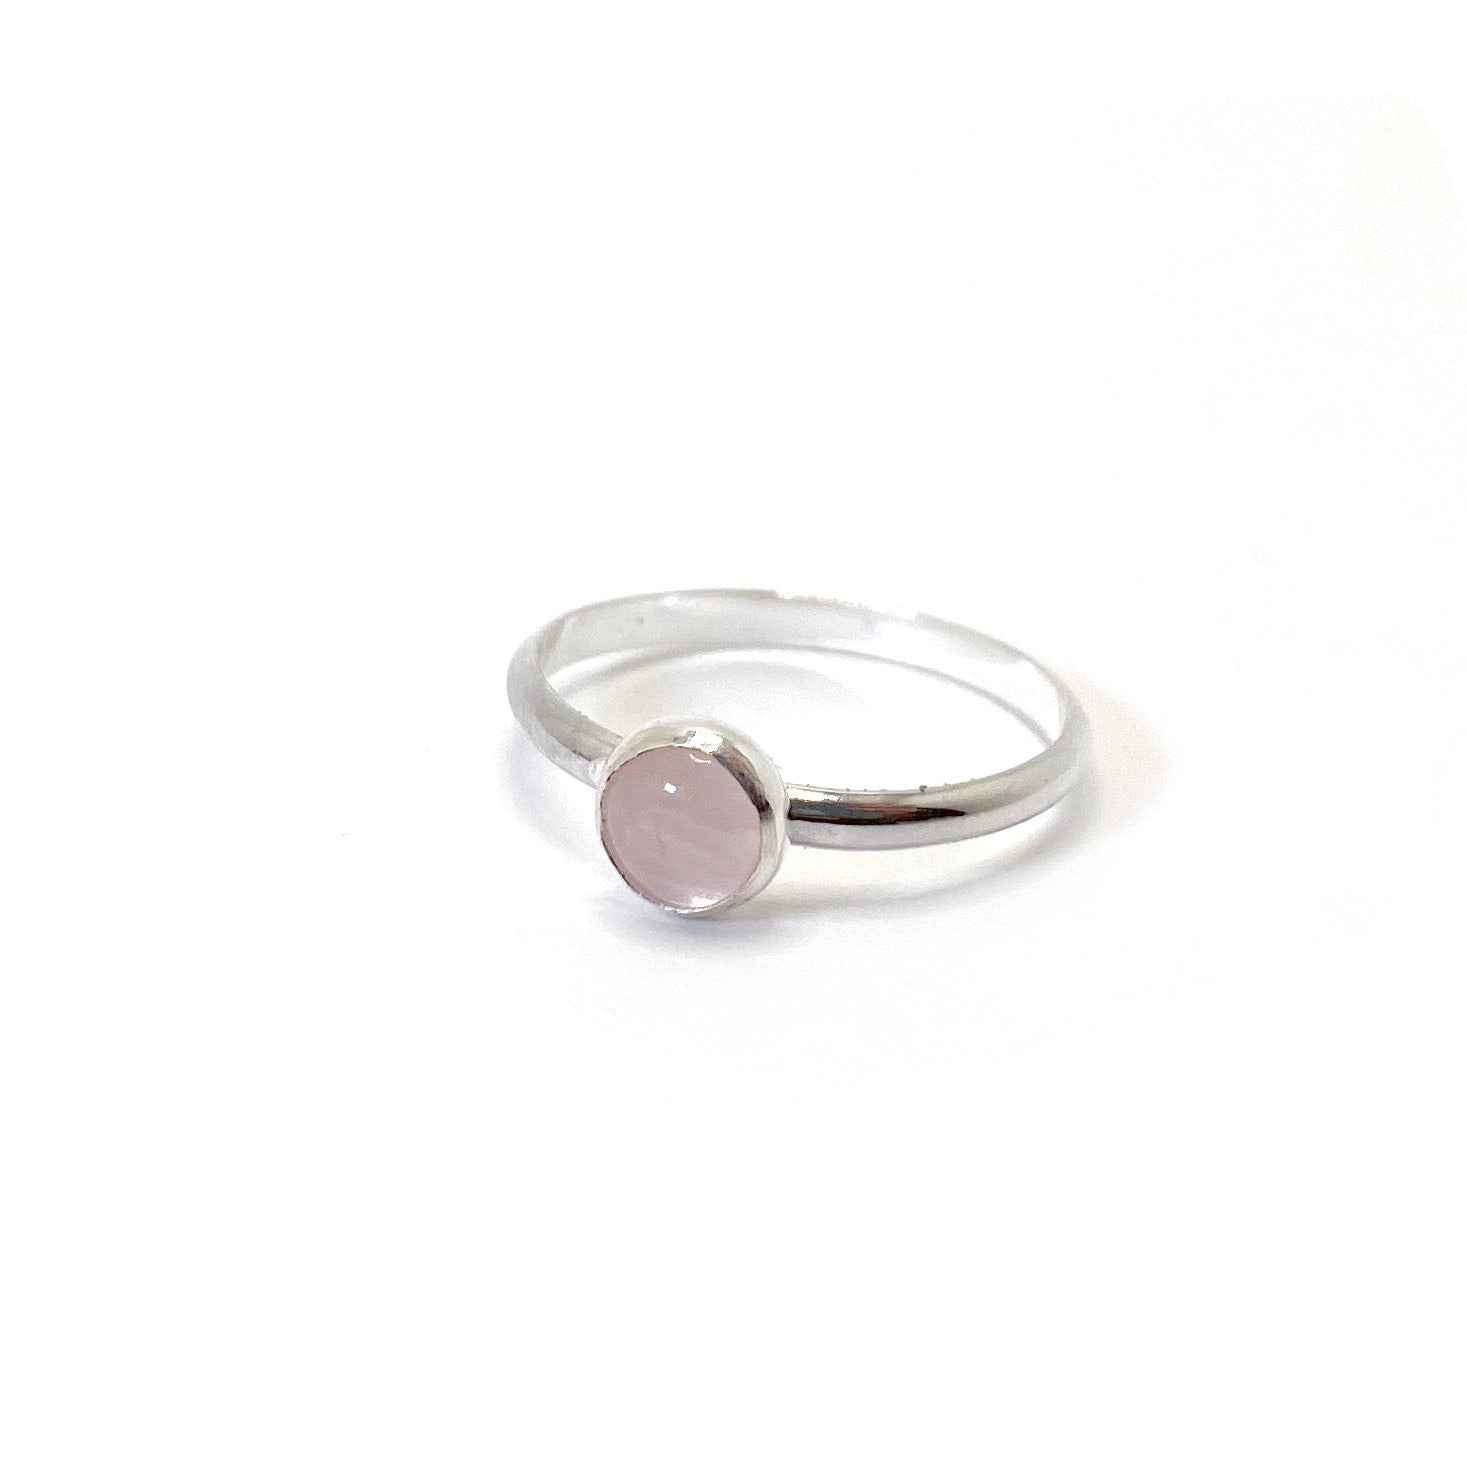 Simple 6mm round rose quartz gemstone stacker ring in sterling silver